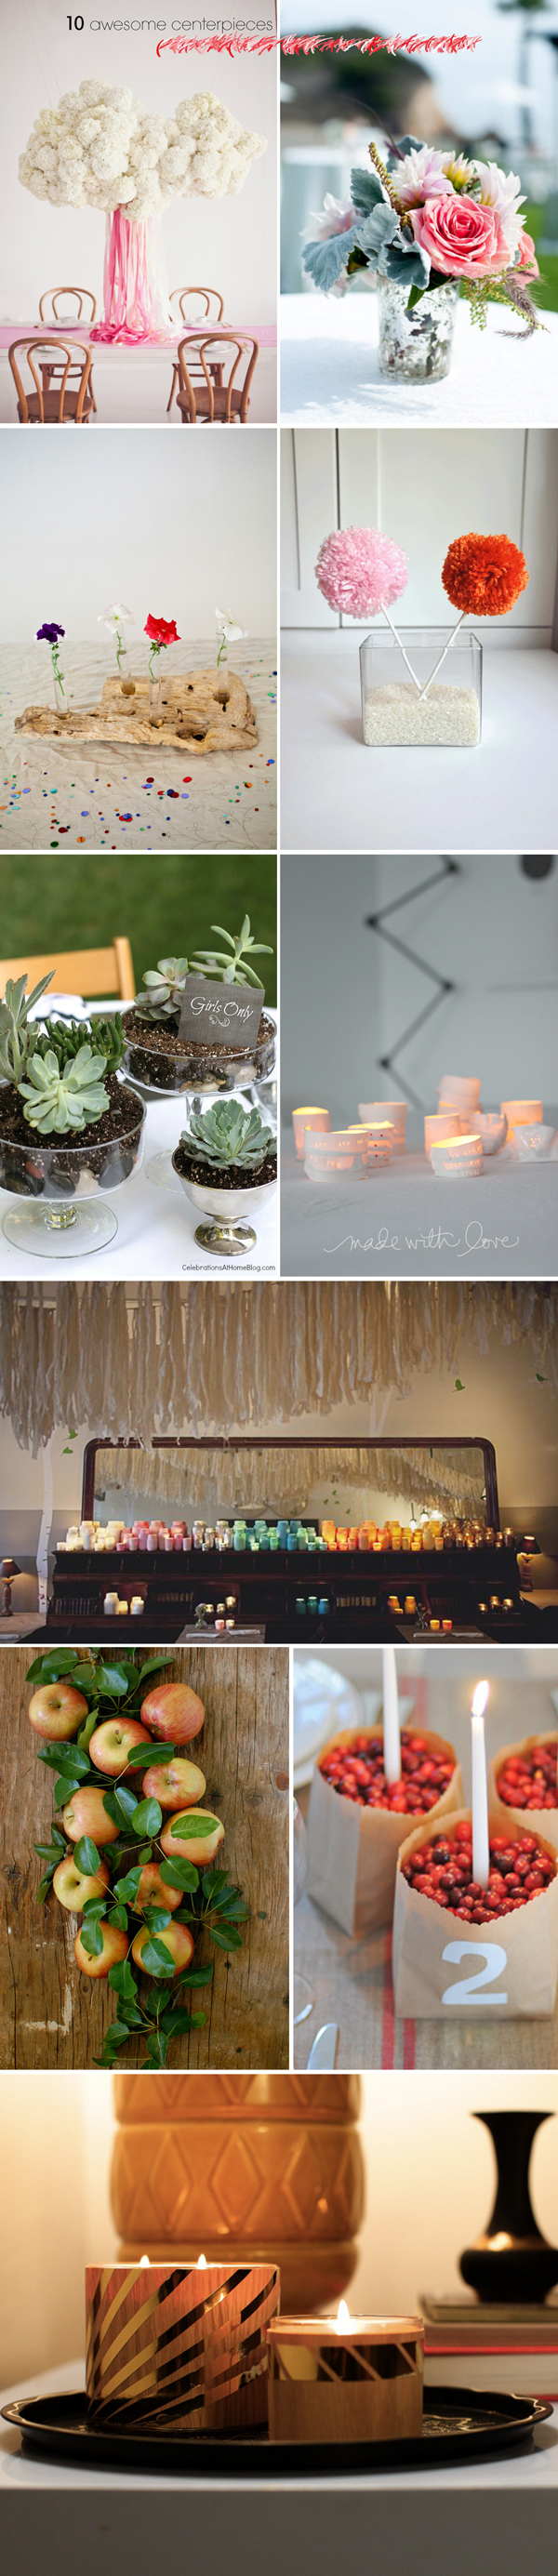 10 awesome centerpieces • A Subtle Revelry